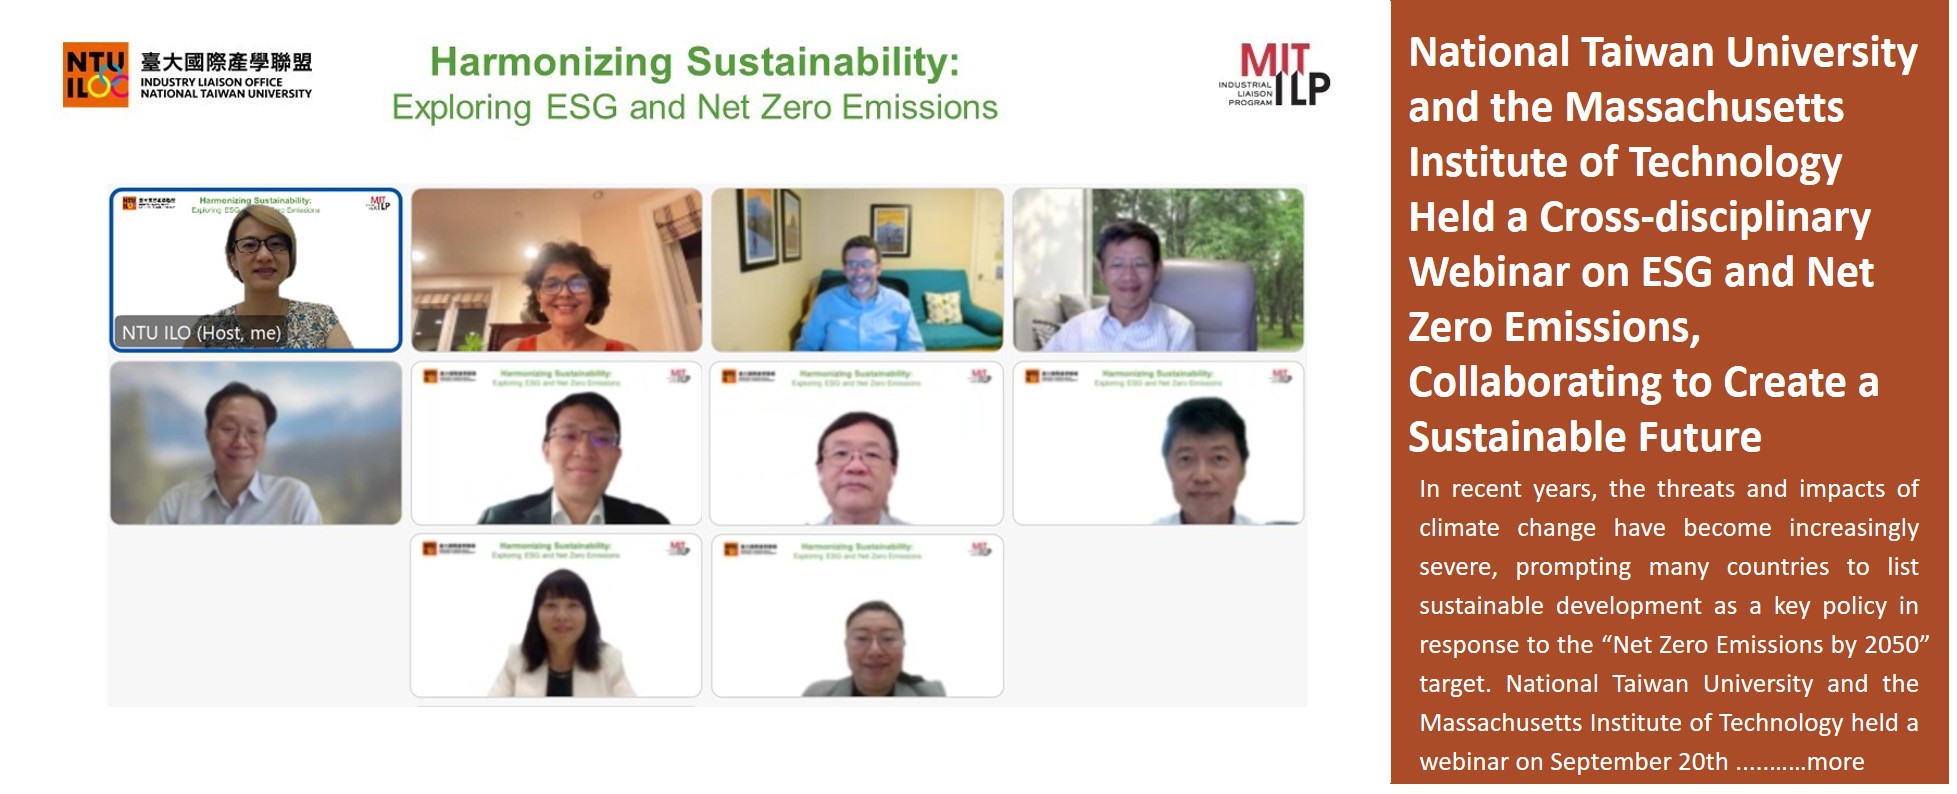 National Taiwan University and the Massachusetts Institute of Technology Held a Cross-disciplinary Webinar on ESG and Net Zero Emissions, Collaborating to Create a Sustainable Future